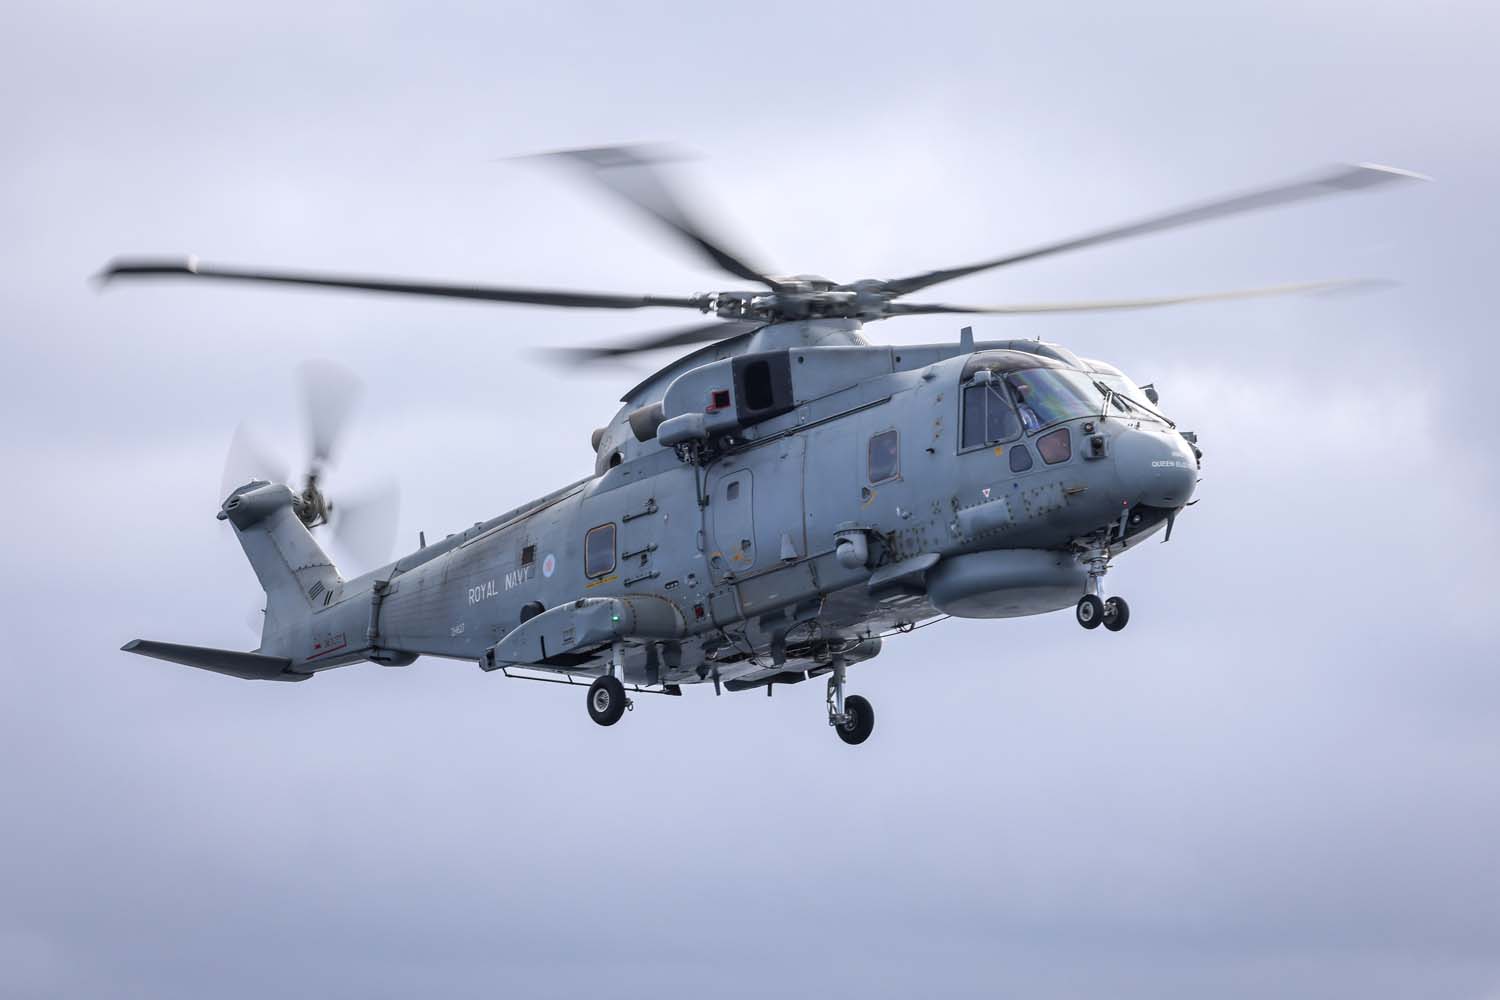 £60 million to develop uncrewed helicopter for Royal Navy